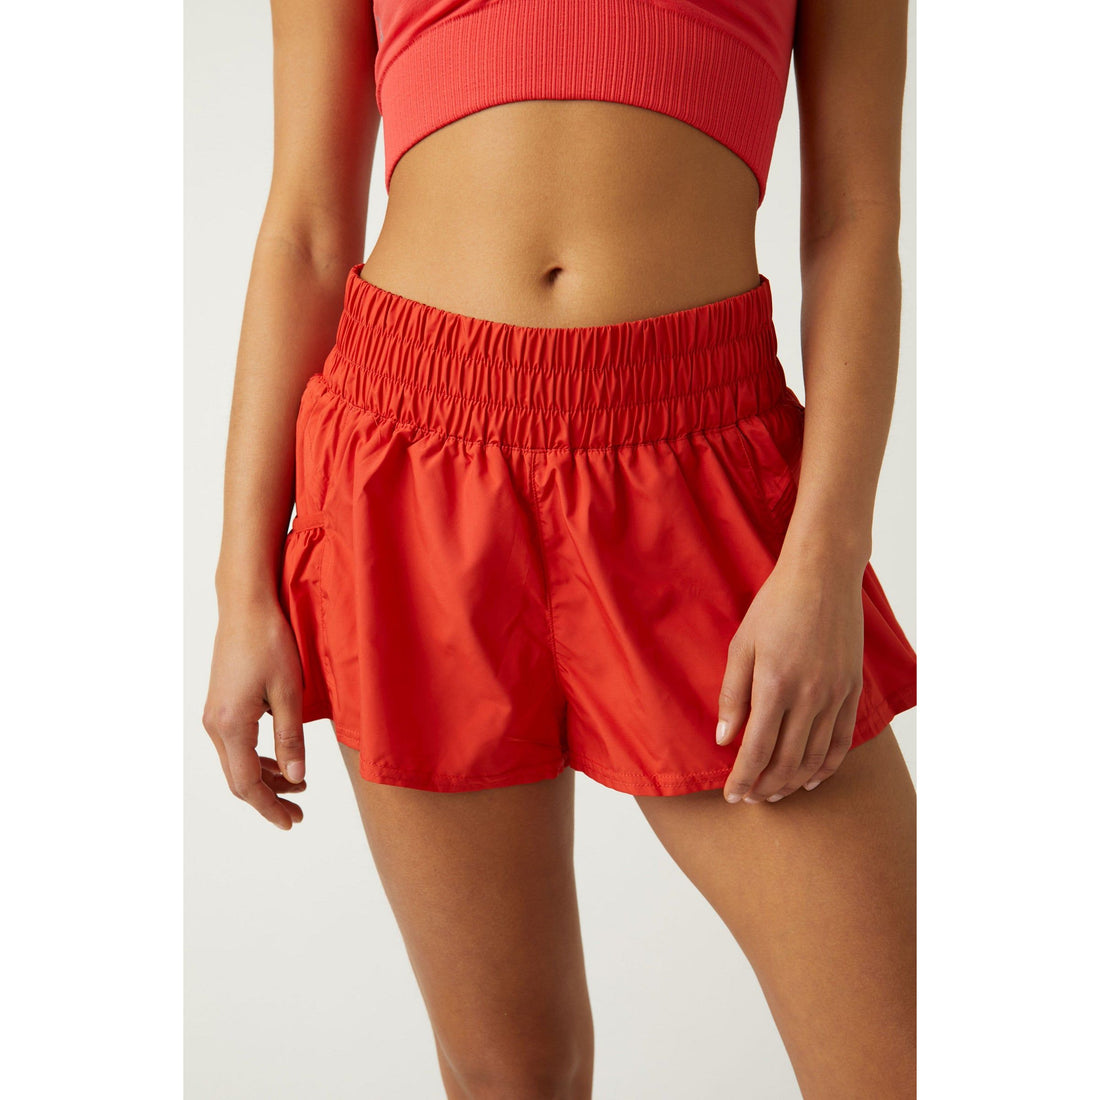 Get Your Flirt On Shorts  Workout attire, Athleisure outfits